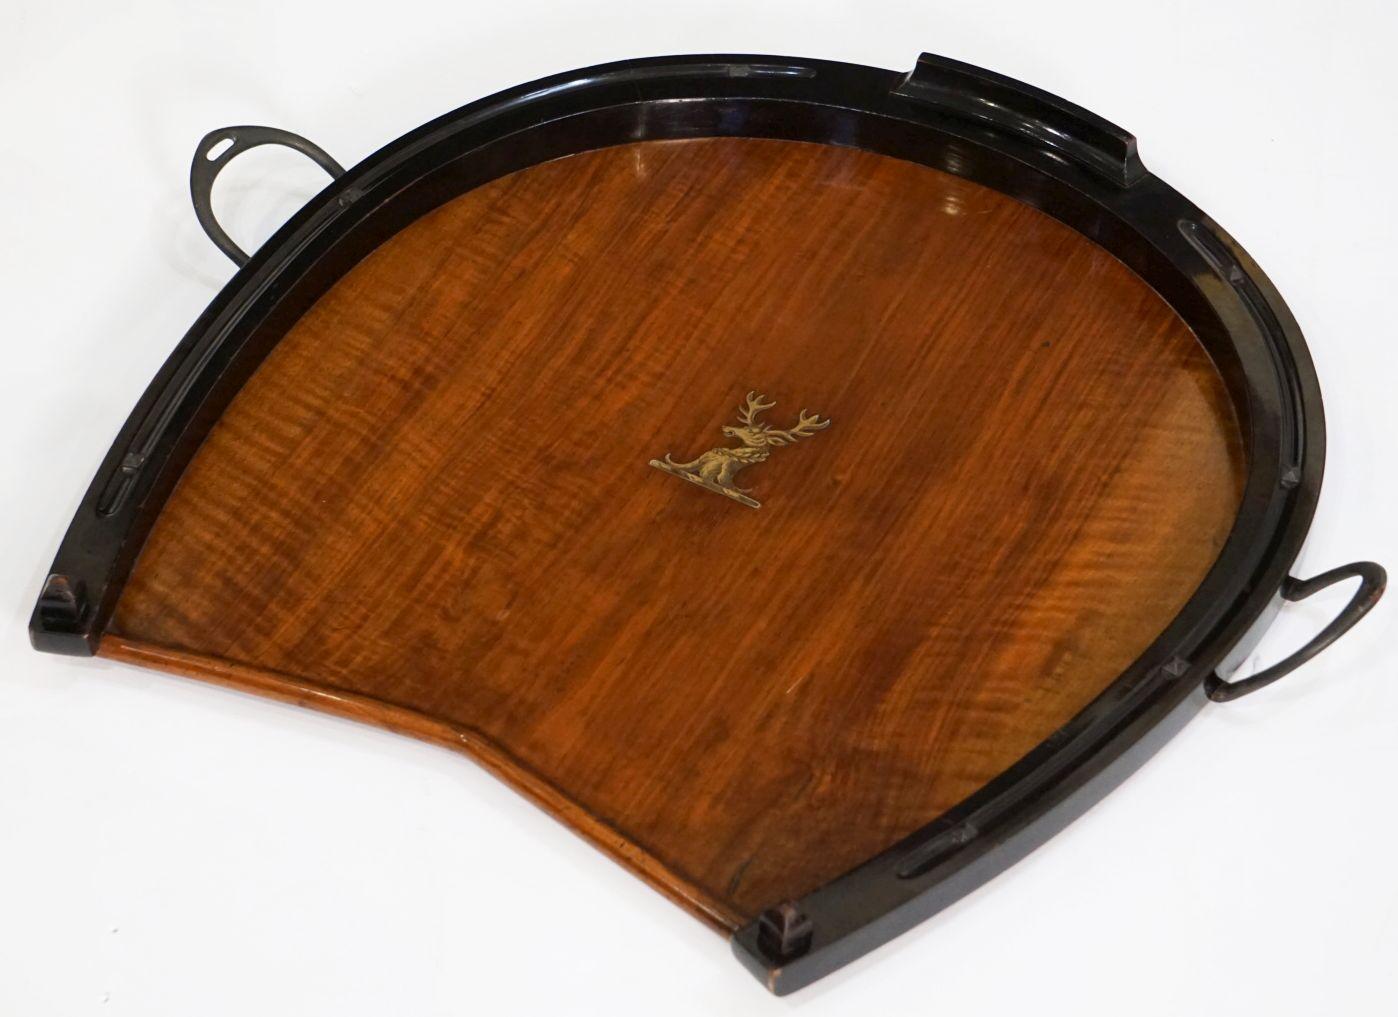 Edwardian Horseshoe-Shaped Tray of Walnut with Inlaid Brass Stag from England